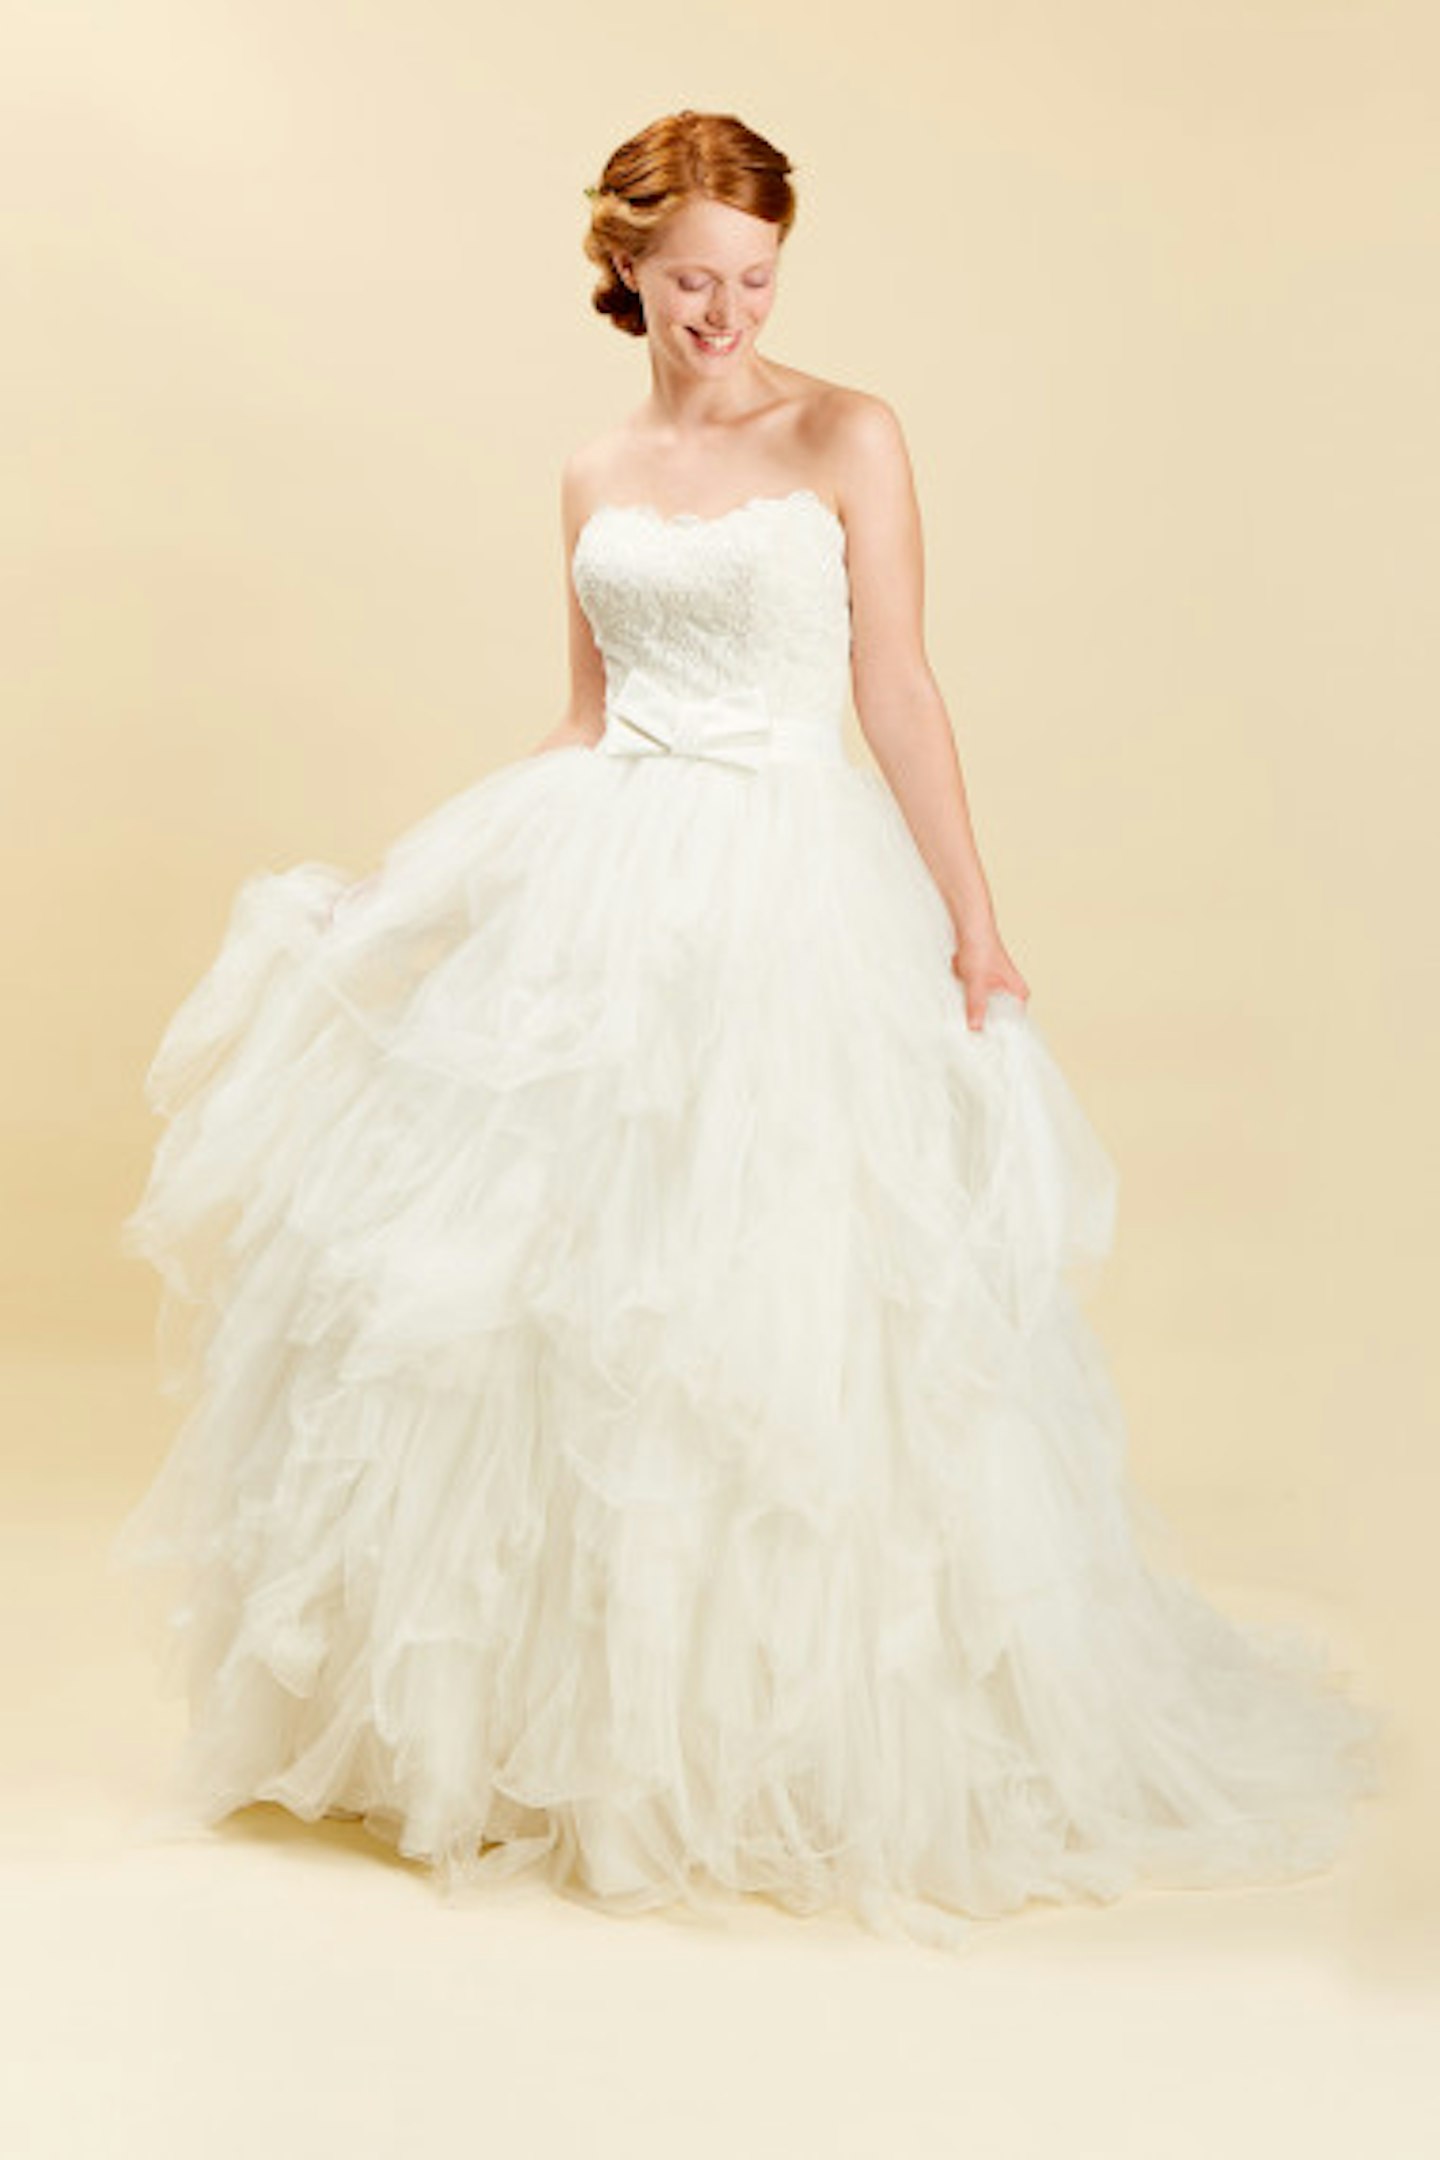 Rosa Claru00e0, Strapless Dress With Handmade Lace Bodice And Full Tulle Skirt, WAS £1,880, NOW £1,000